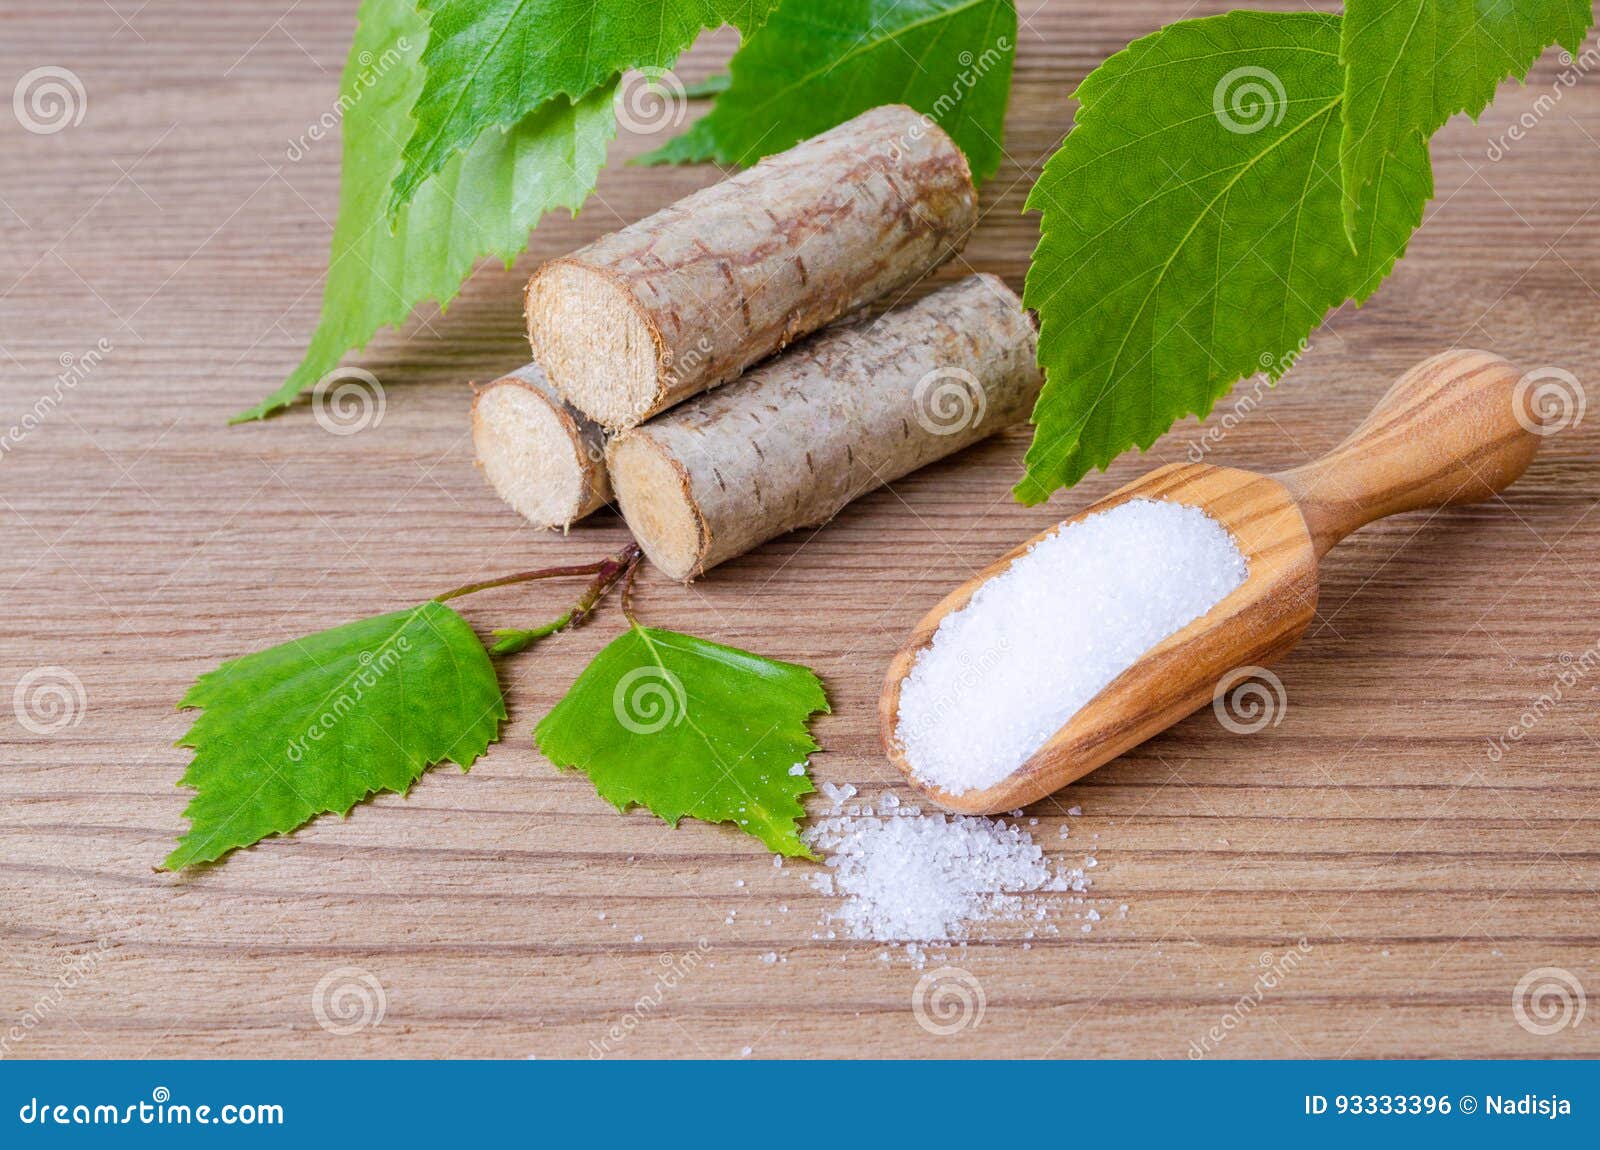 sugar substitute xylitol, scoop with birch sugar, liefs and wood